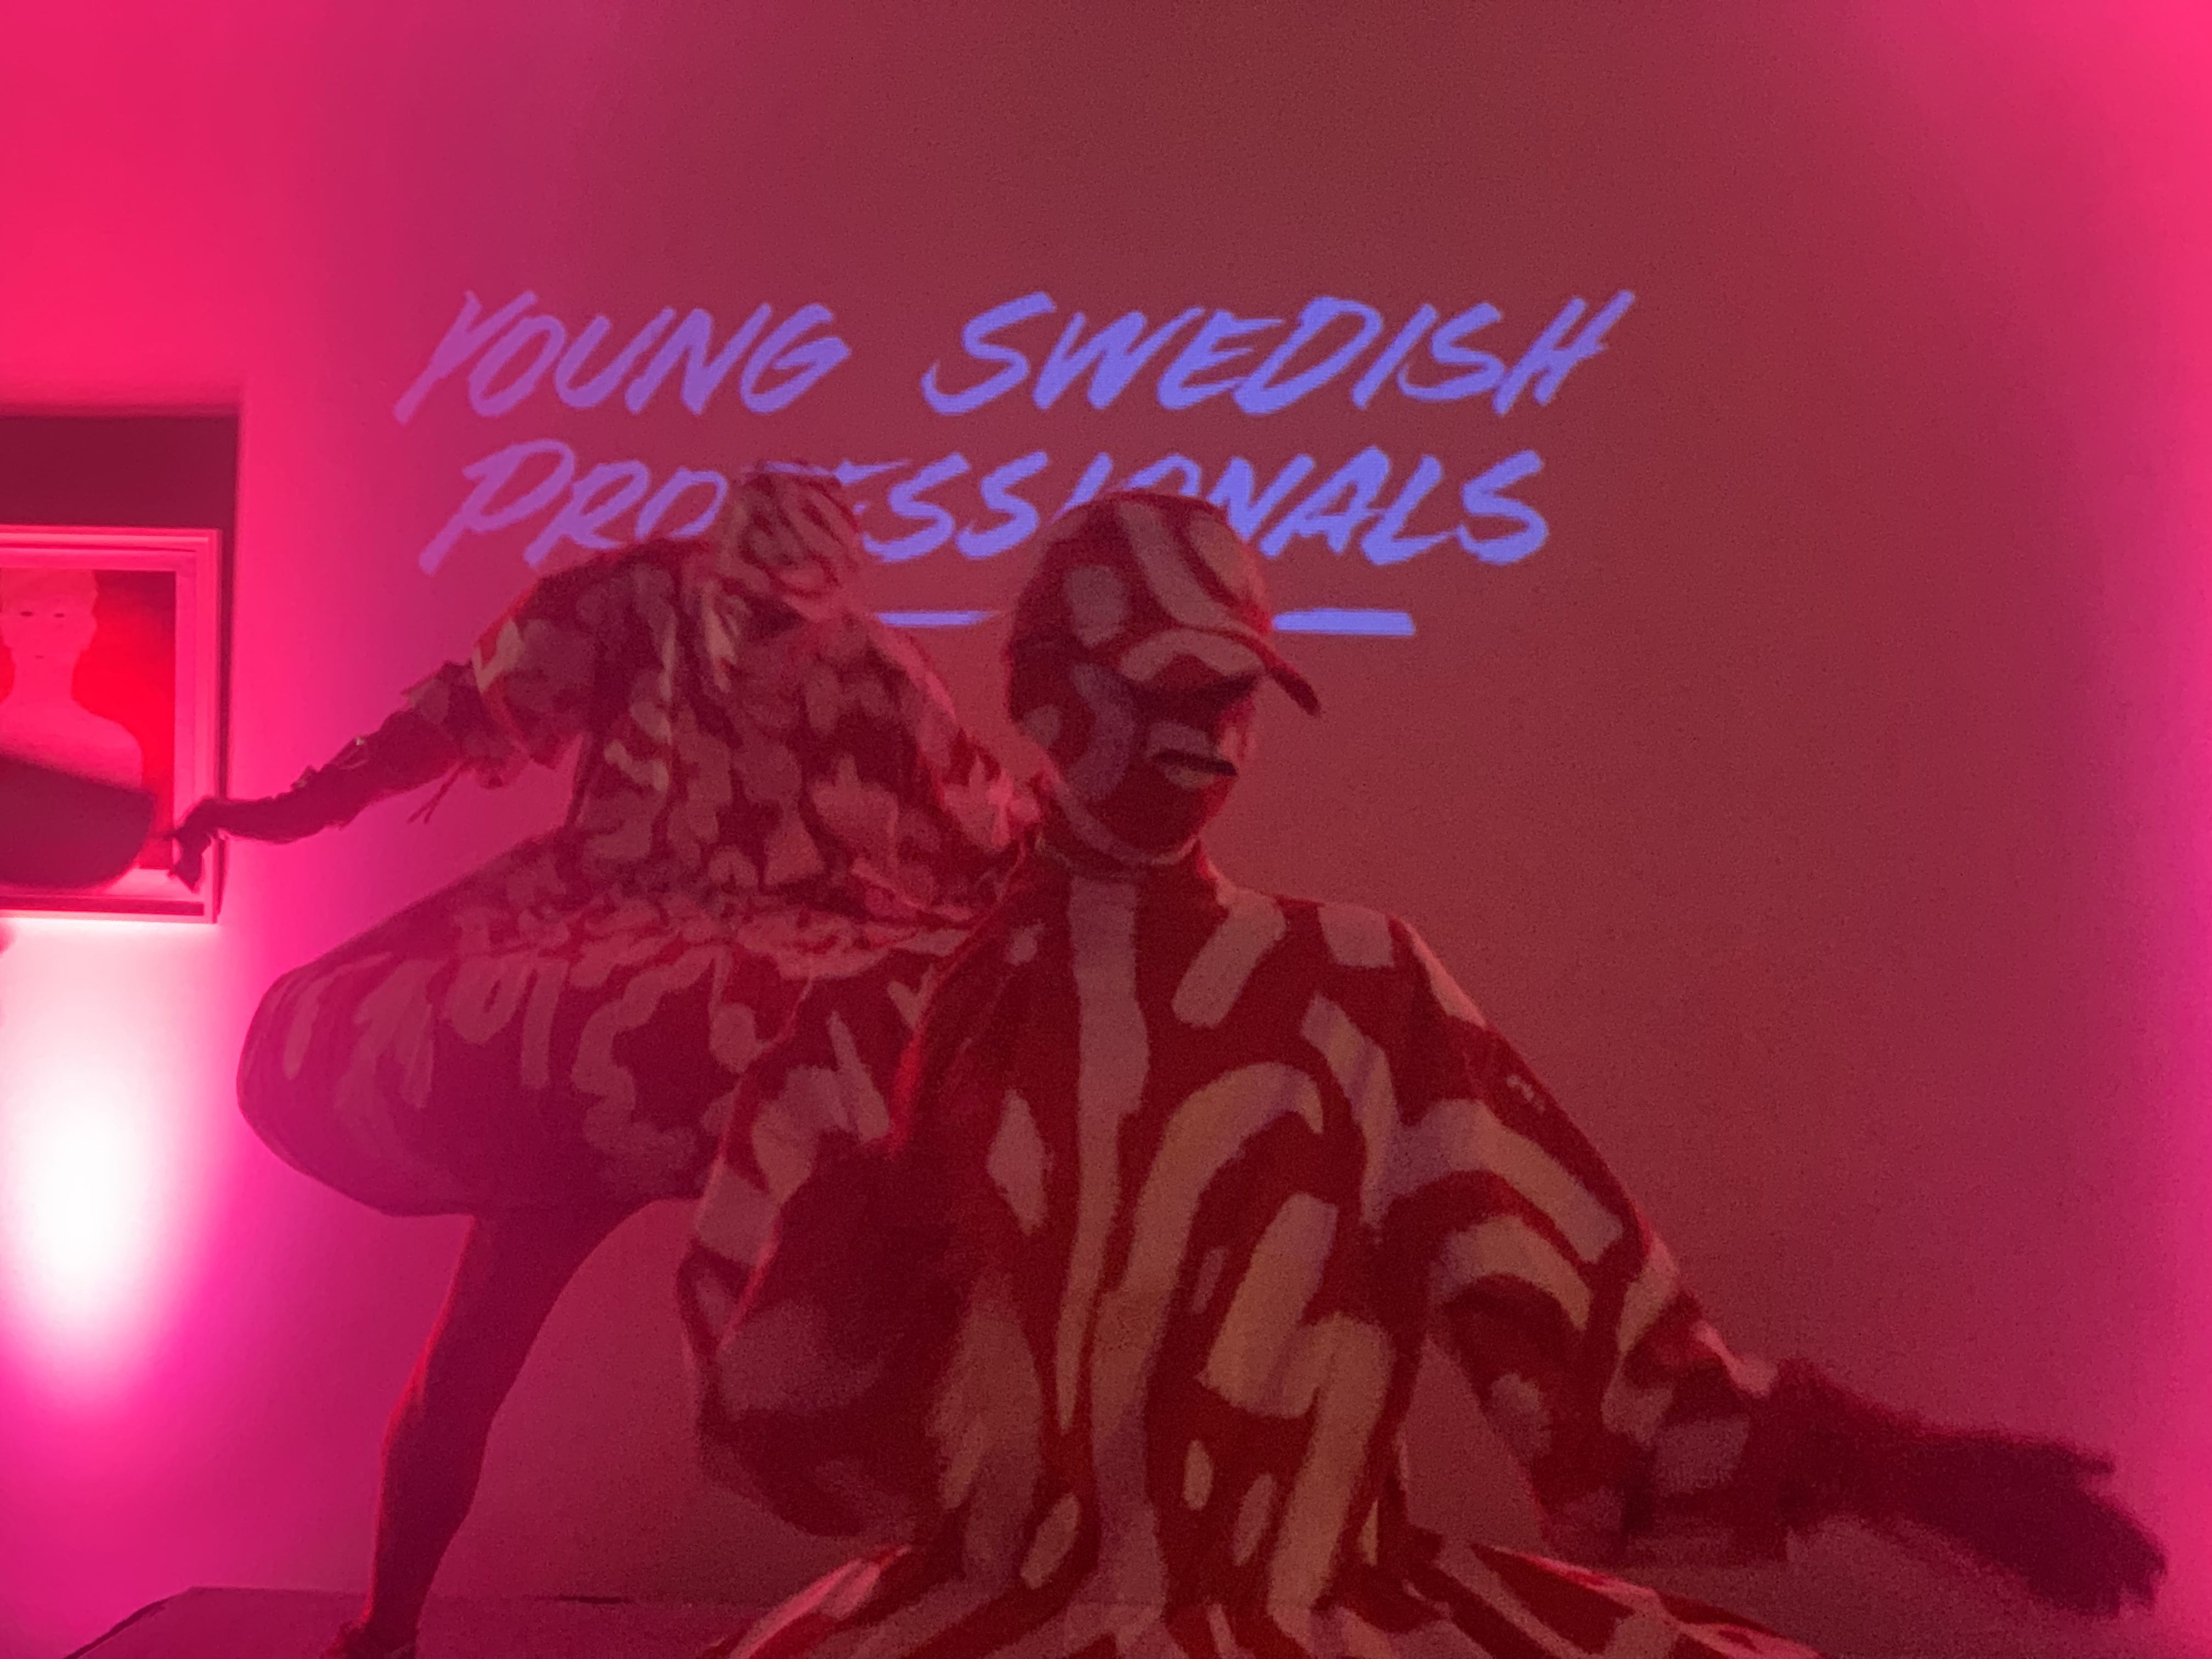 Event Report: Young Swedish Professionals Launch Event